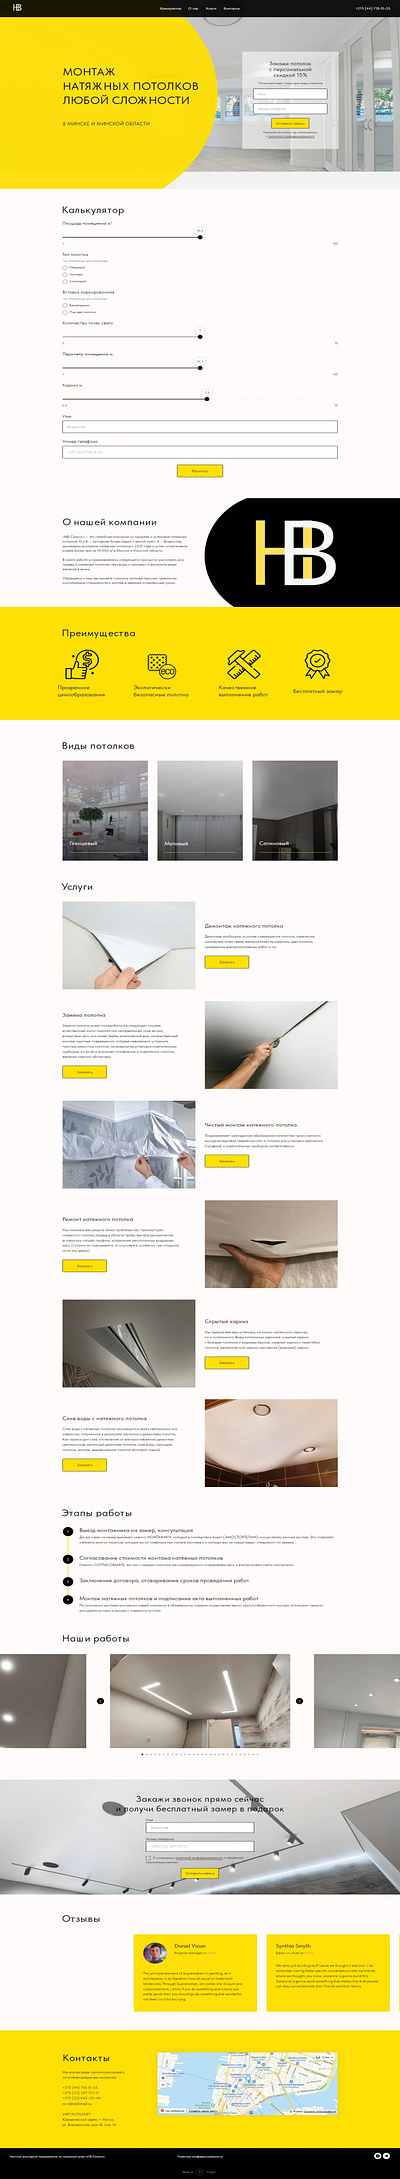 Landing page "Stretch ceilings" design landing page site